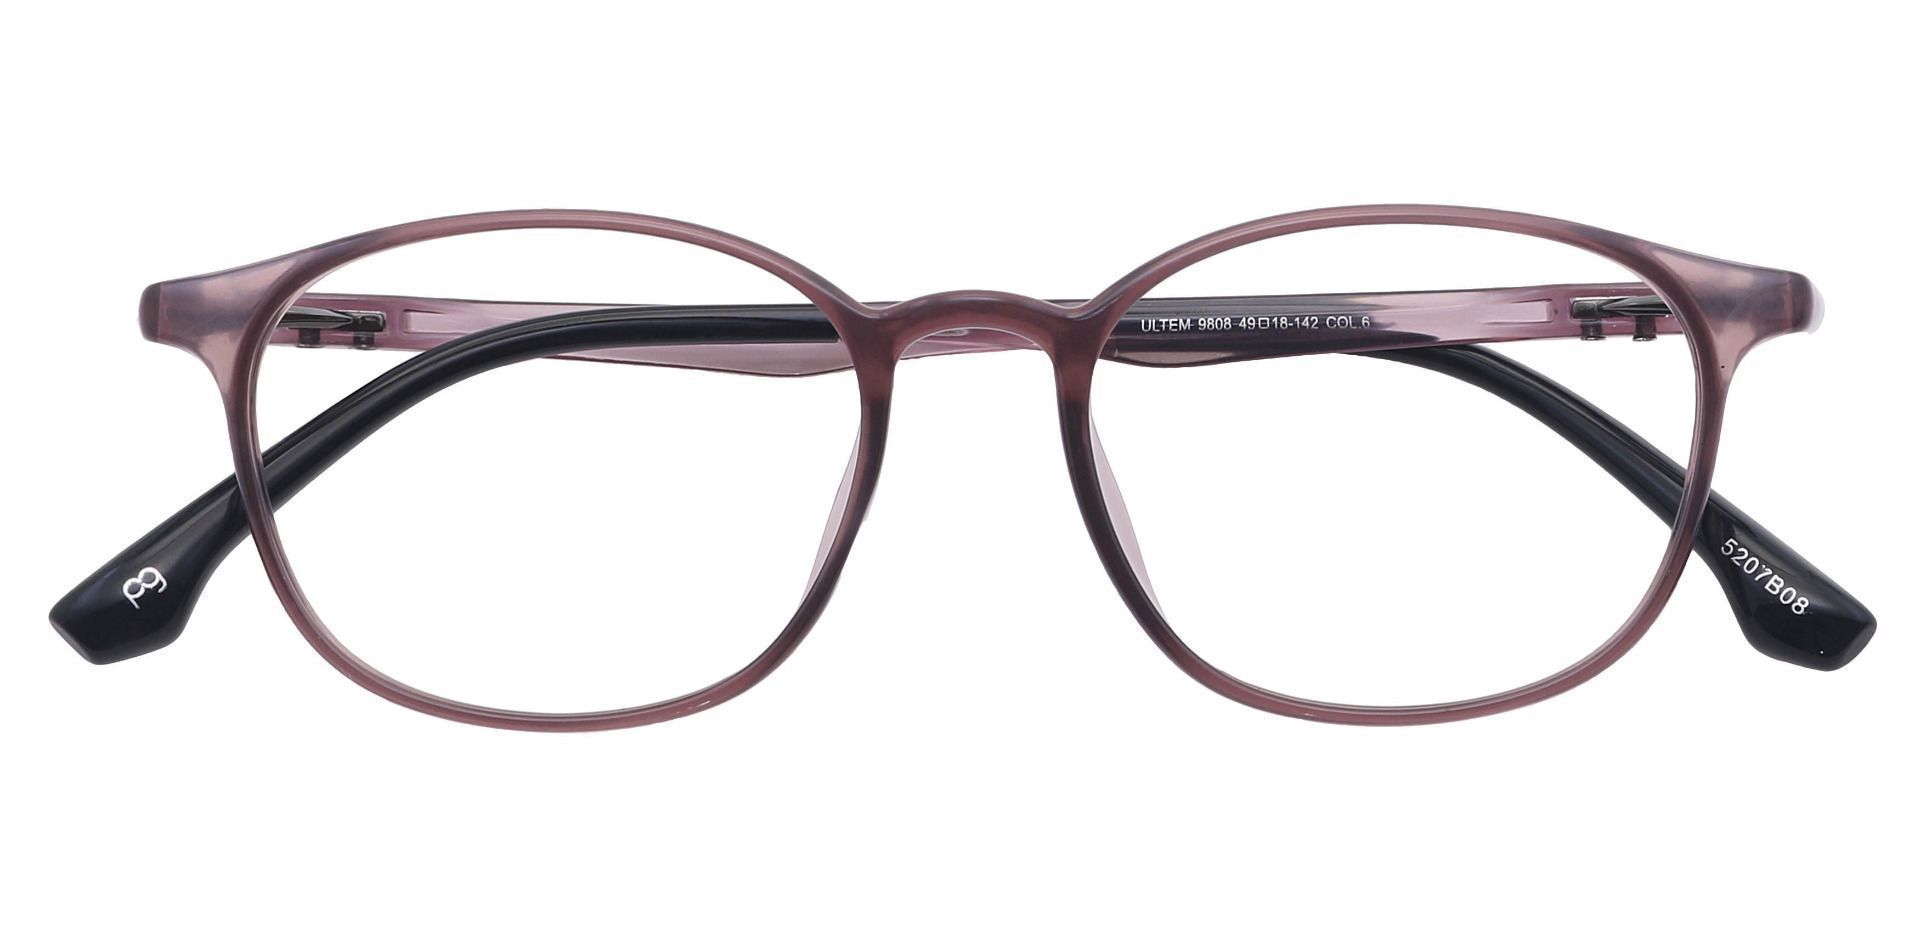 Shannon Oval Lined Bifocal Glasses - Brown